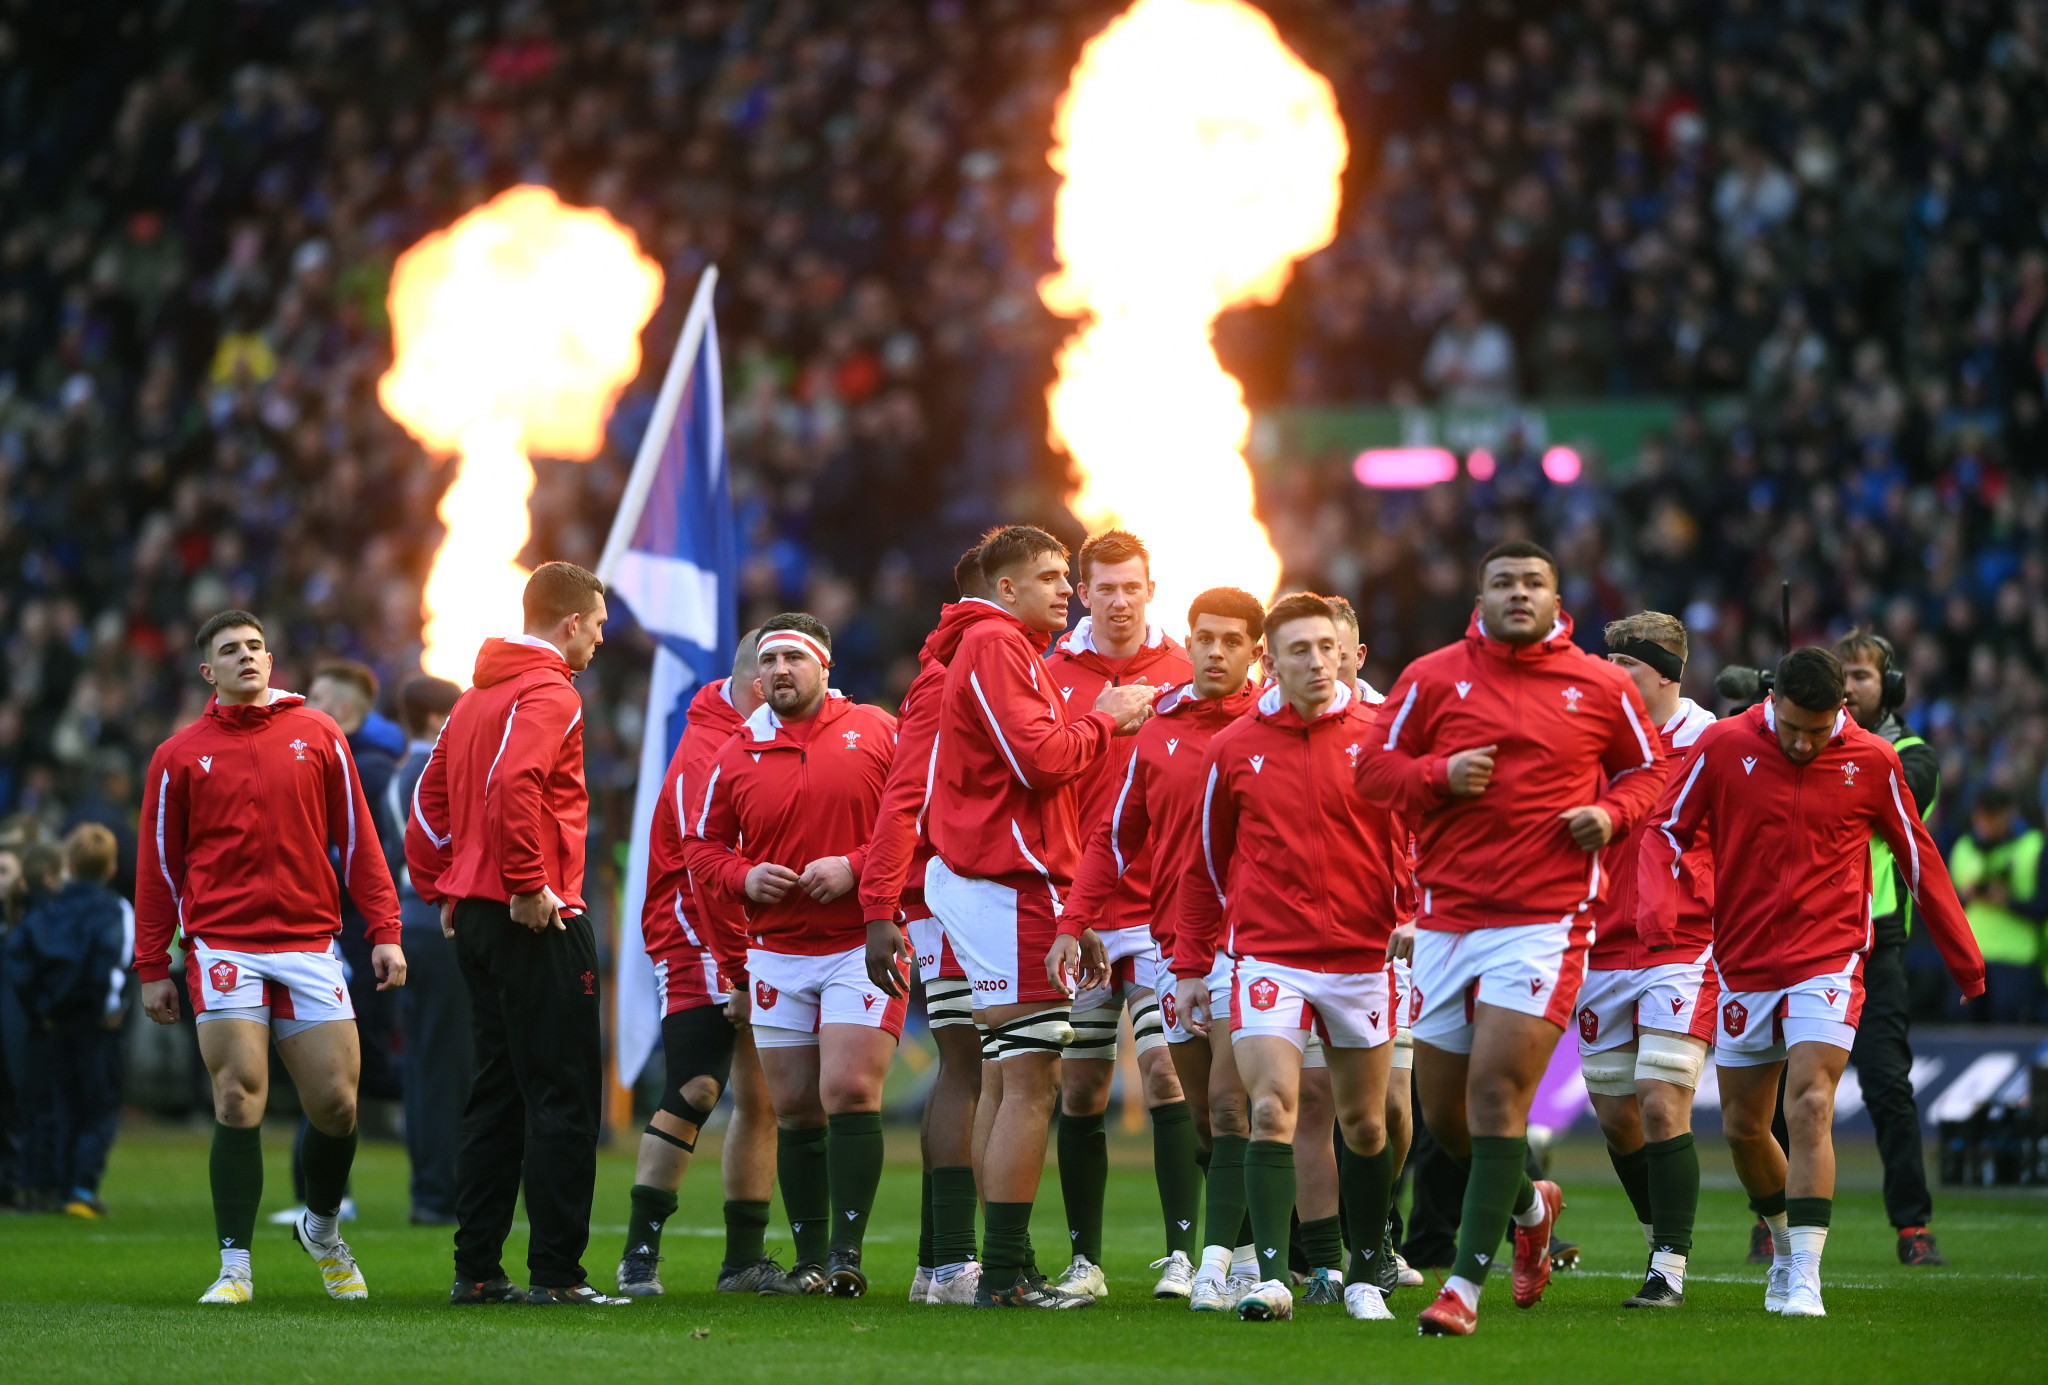 The Welsh Rugby Player Association and the Professional Rugby Board have been in dispute since January regarding future pay structures ©Getty Images